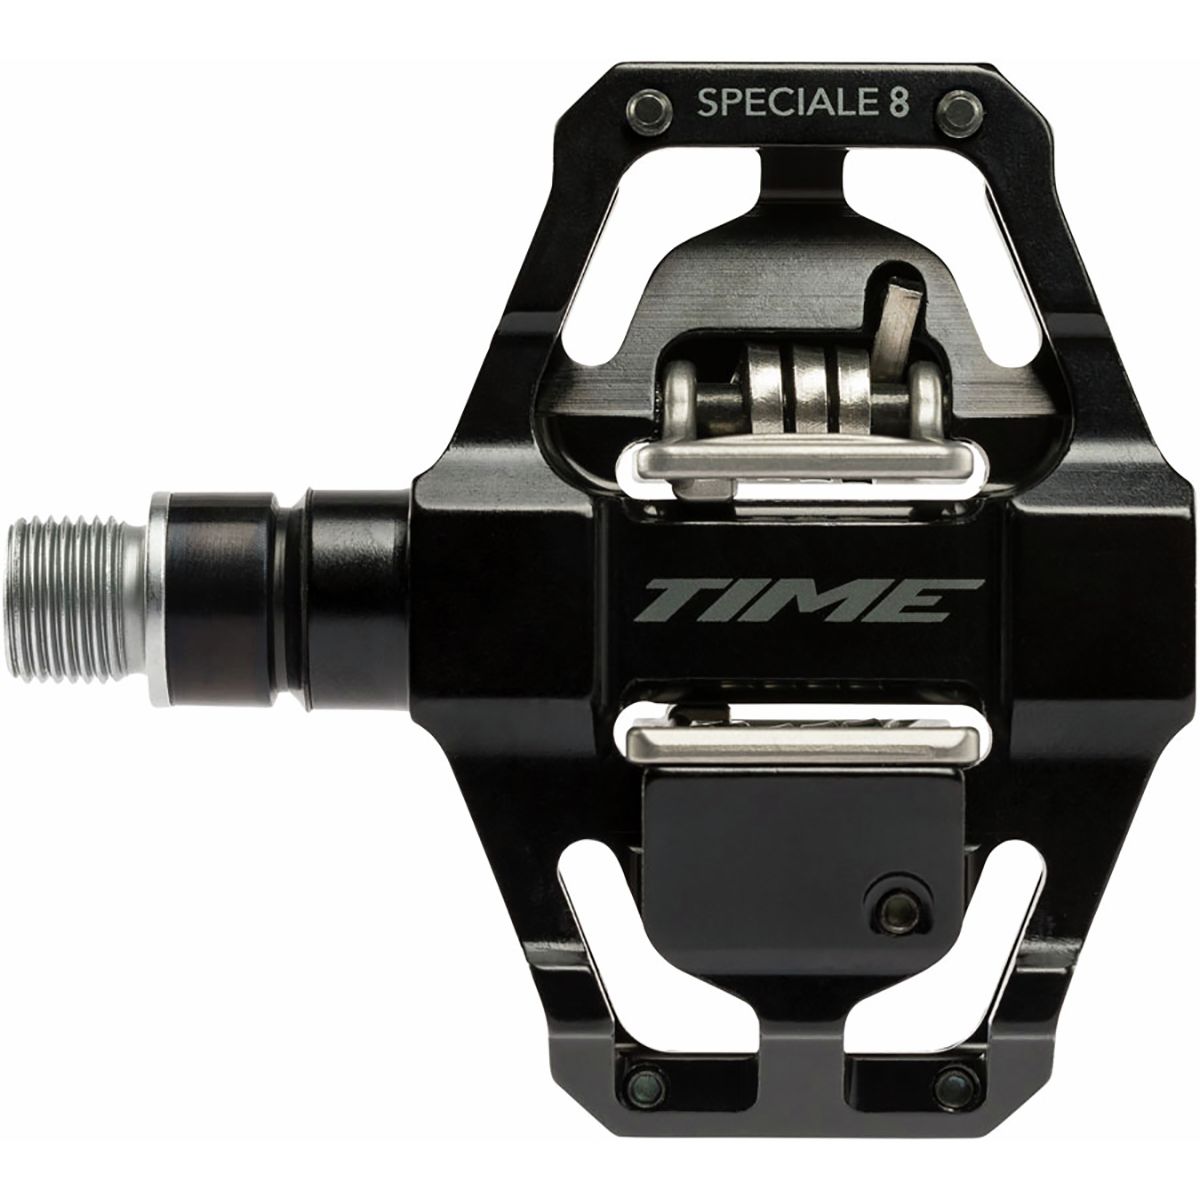 TIME Speciale 8 Pedals